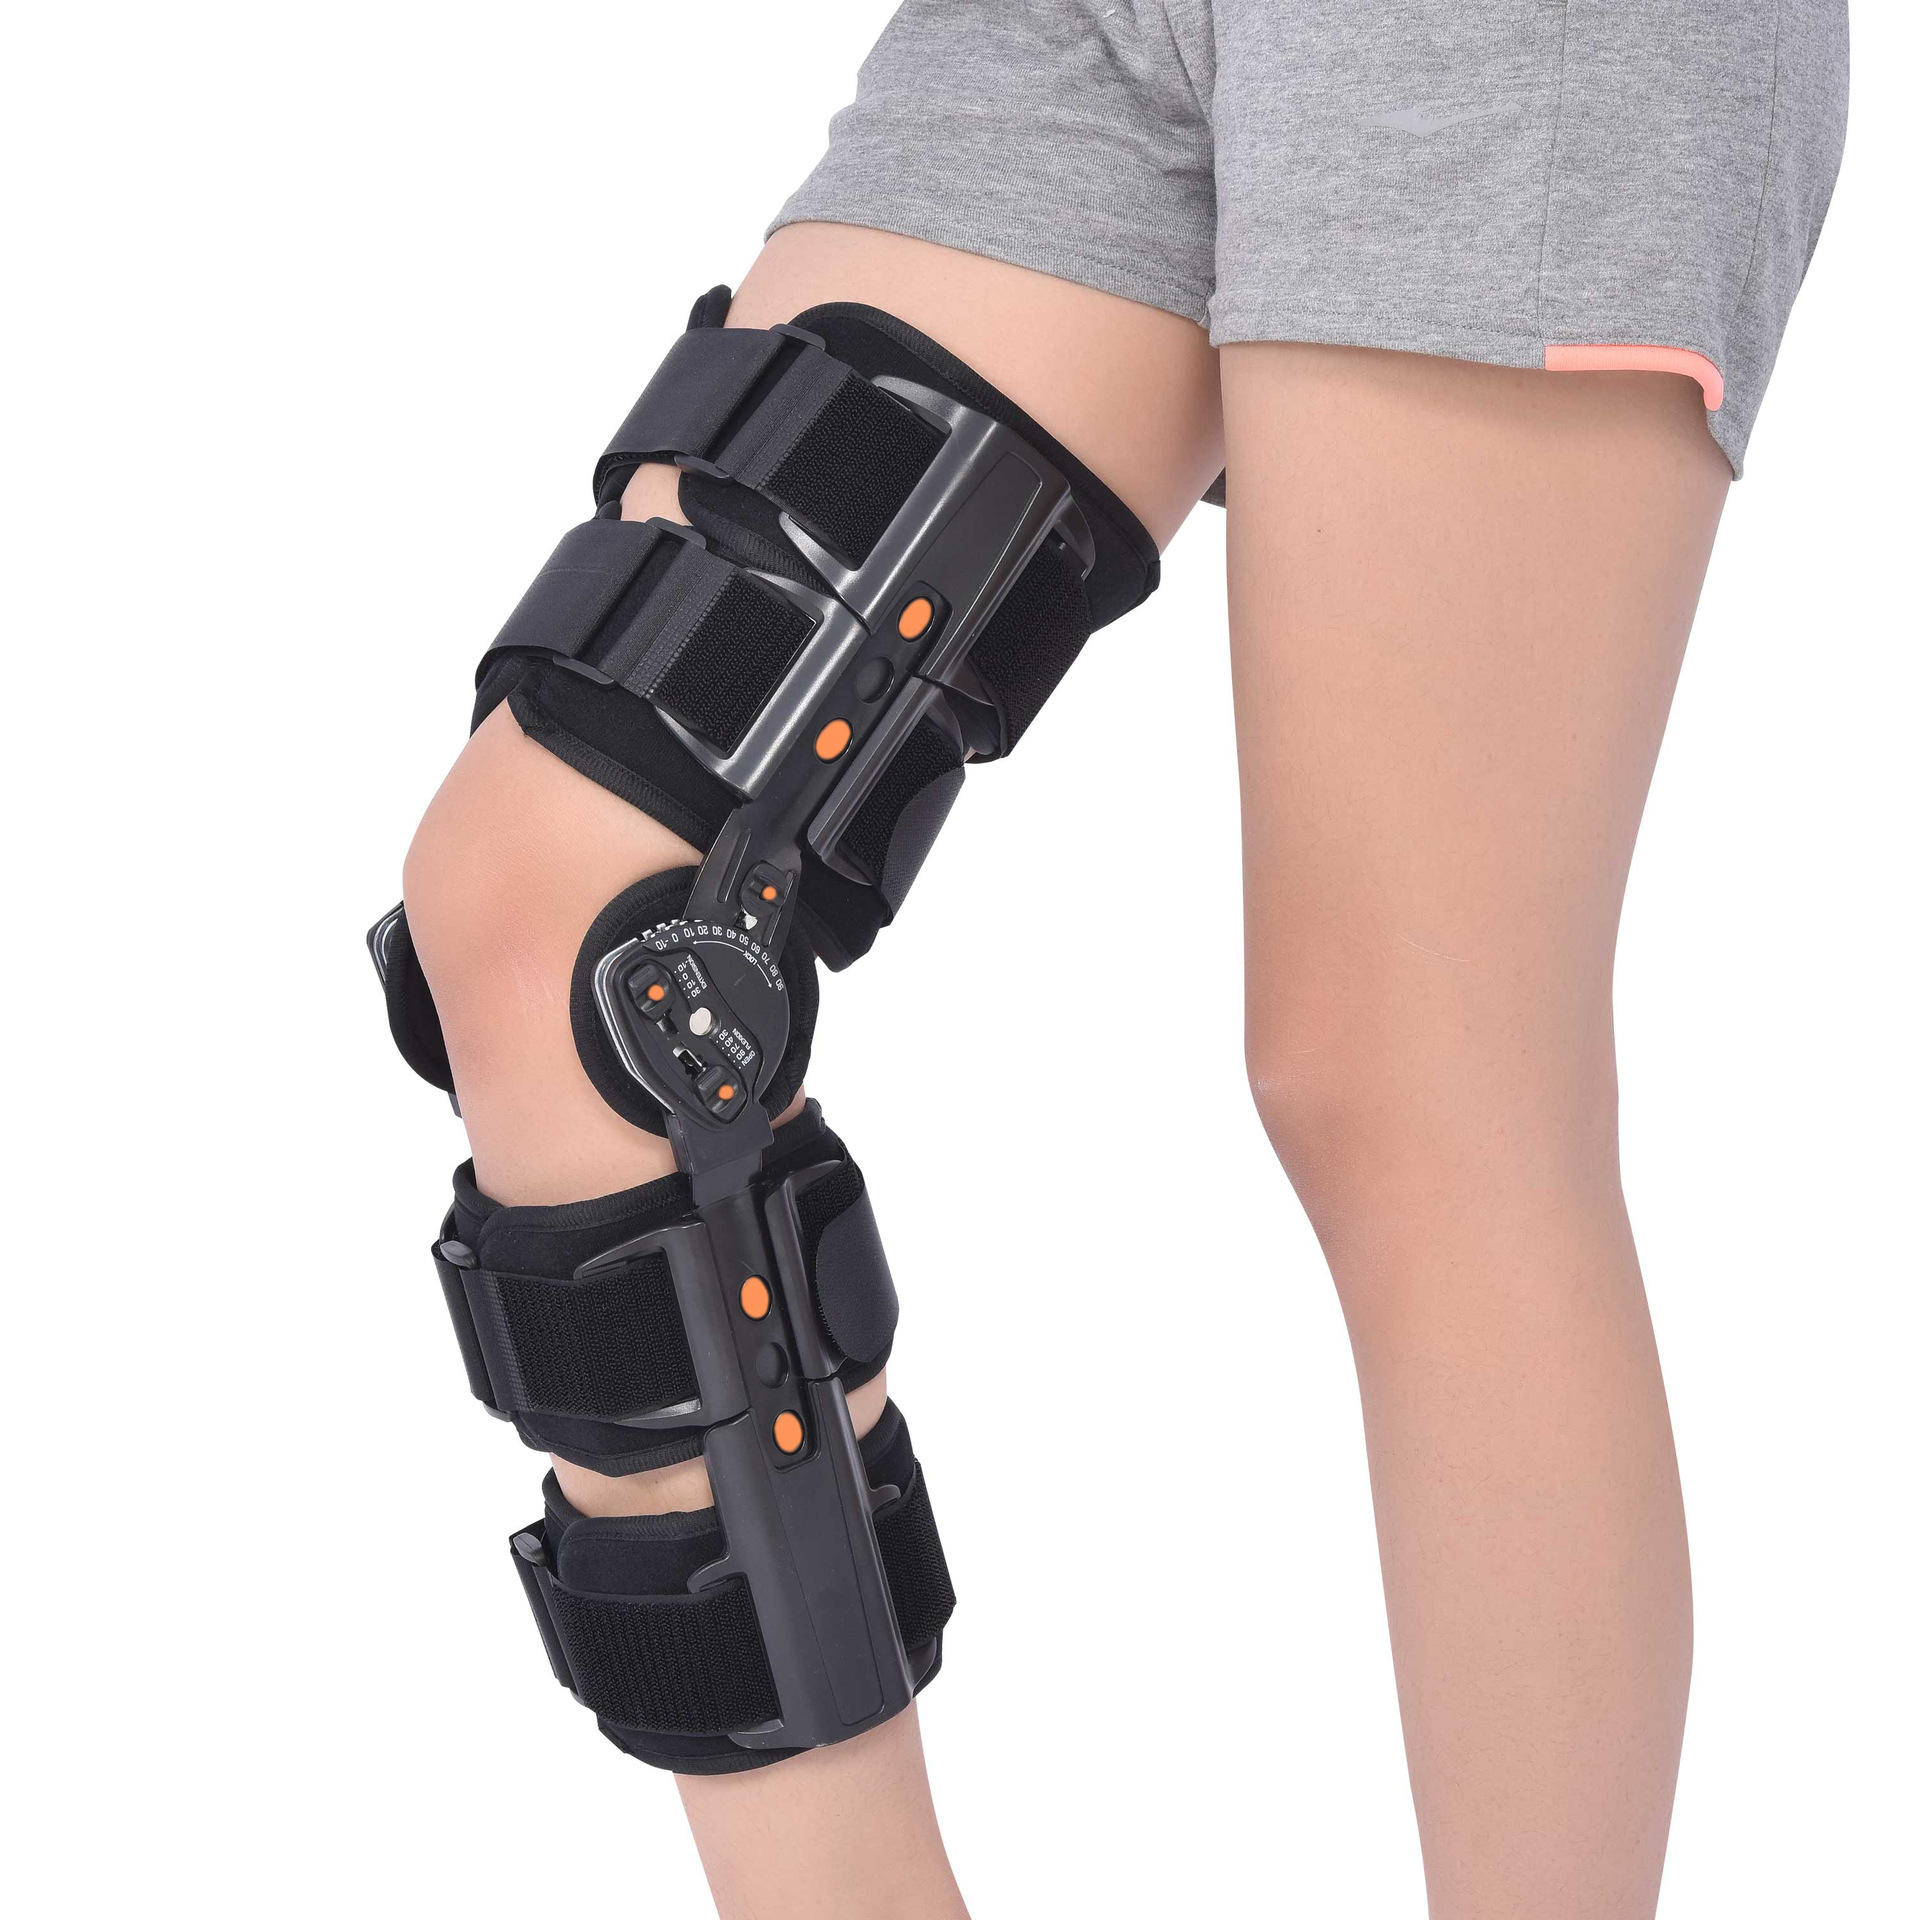 RG-021 Knee and Leg Fixation Braces for Post-operative Rehabilitation Fixation of Knee Fractures